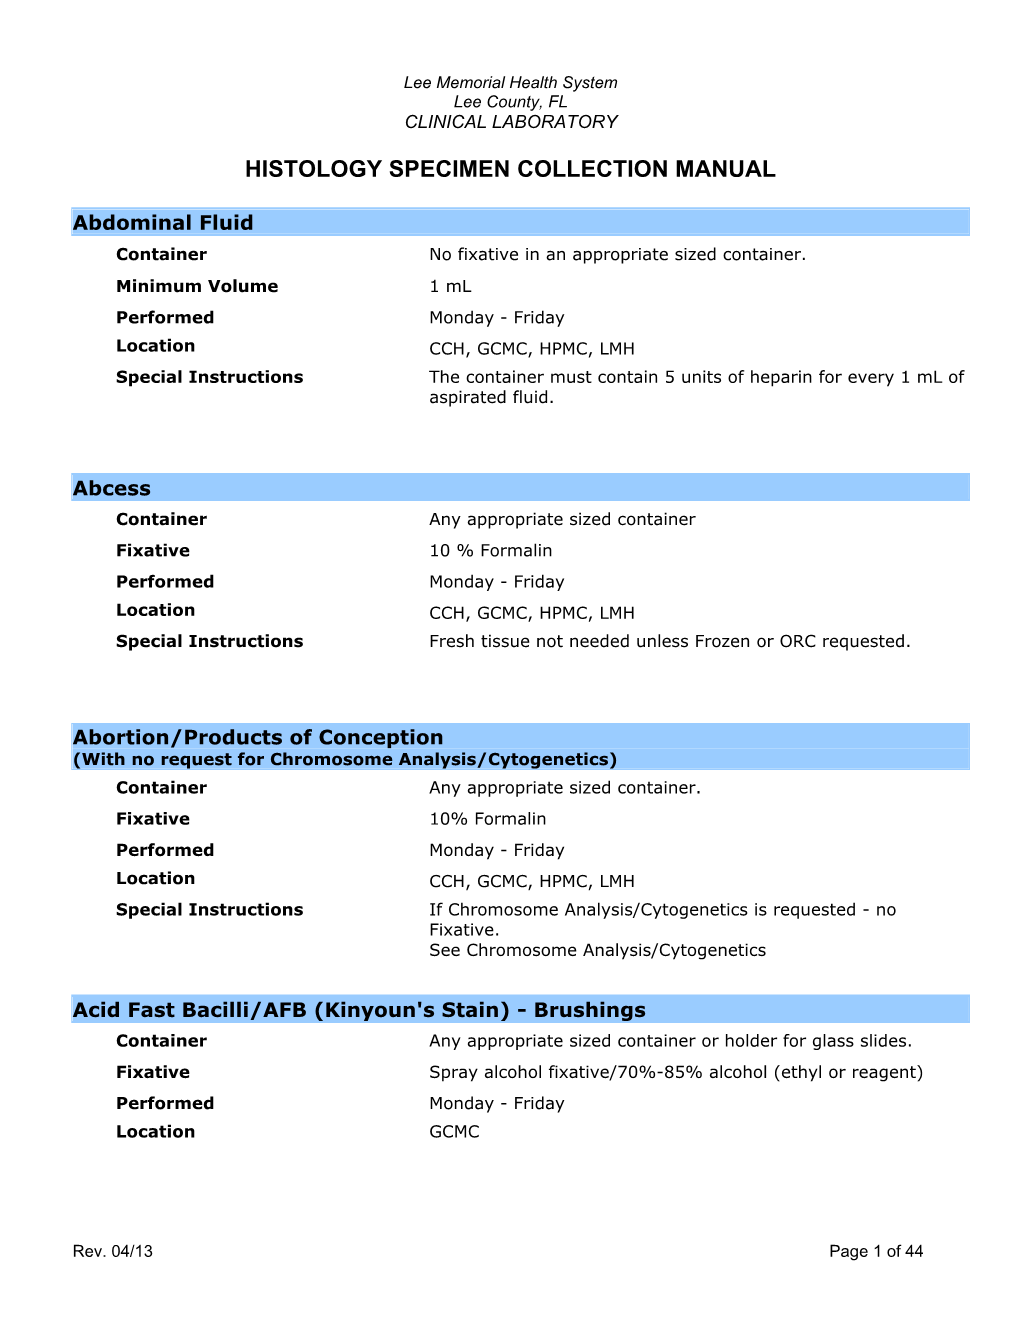 Histology Specimen Collection Manual